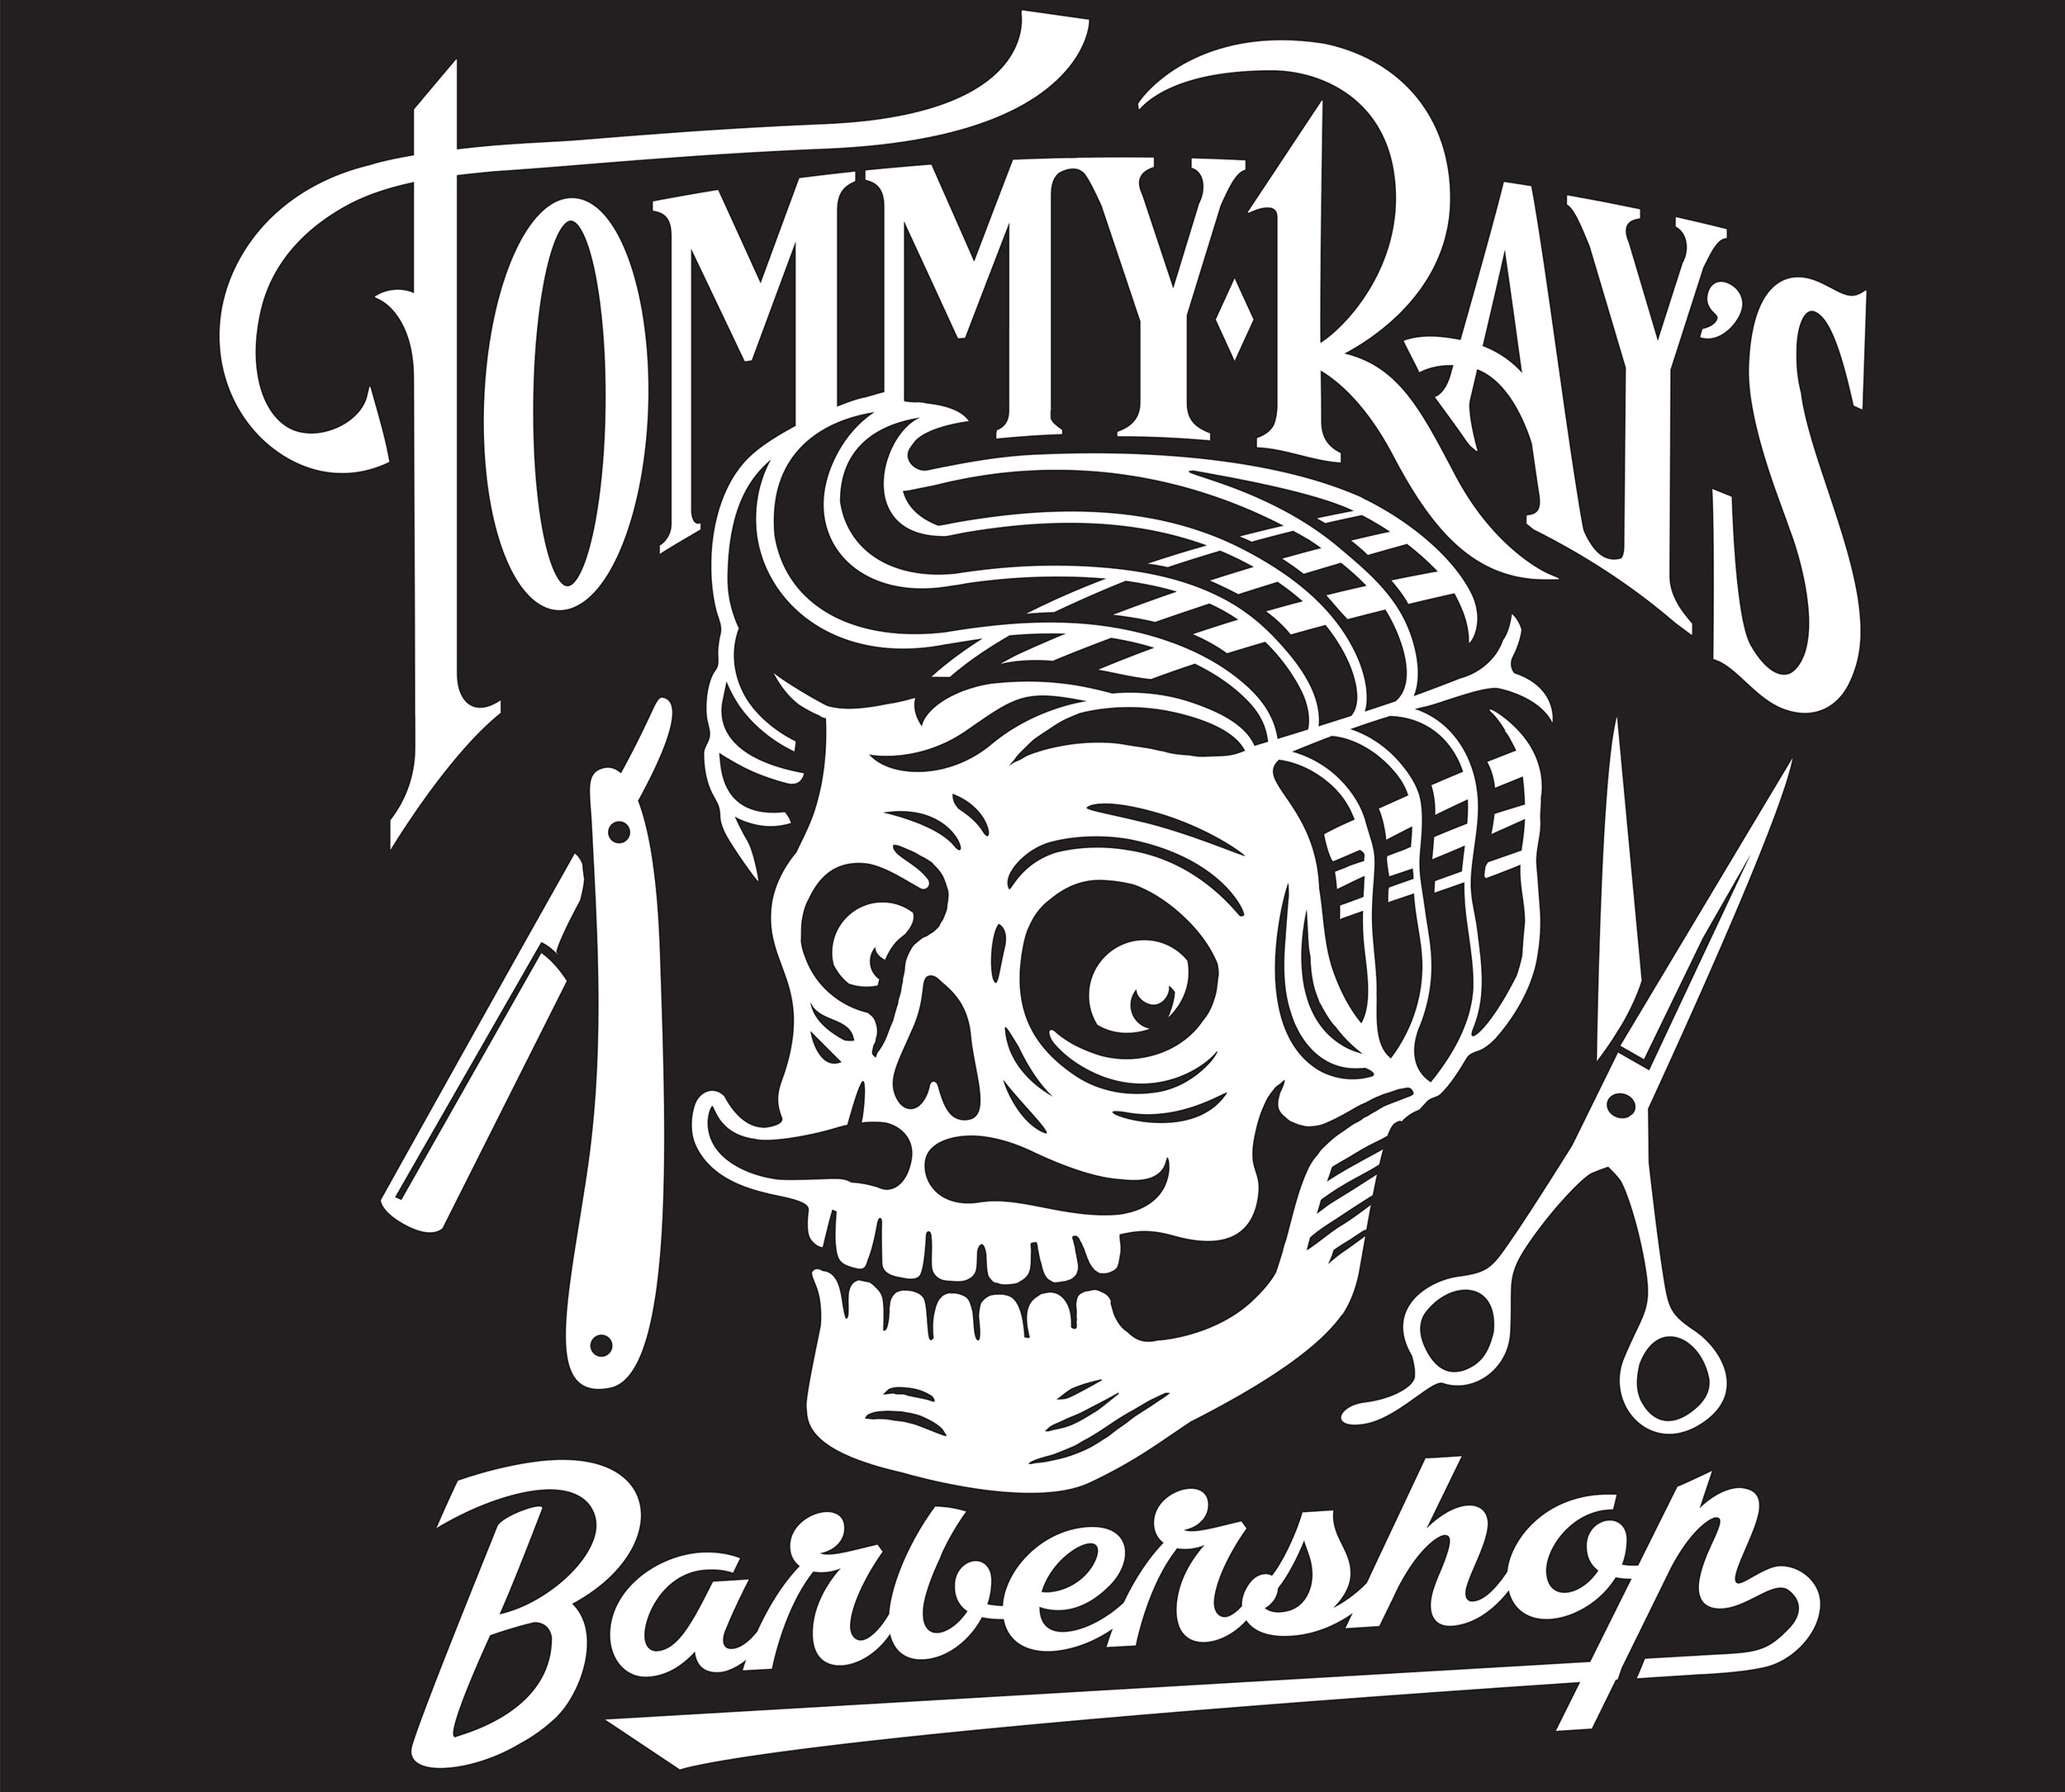 Tommy Rays barbershop